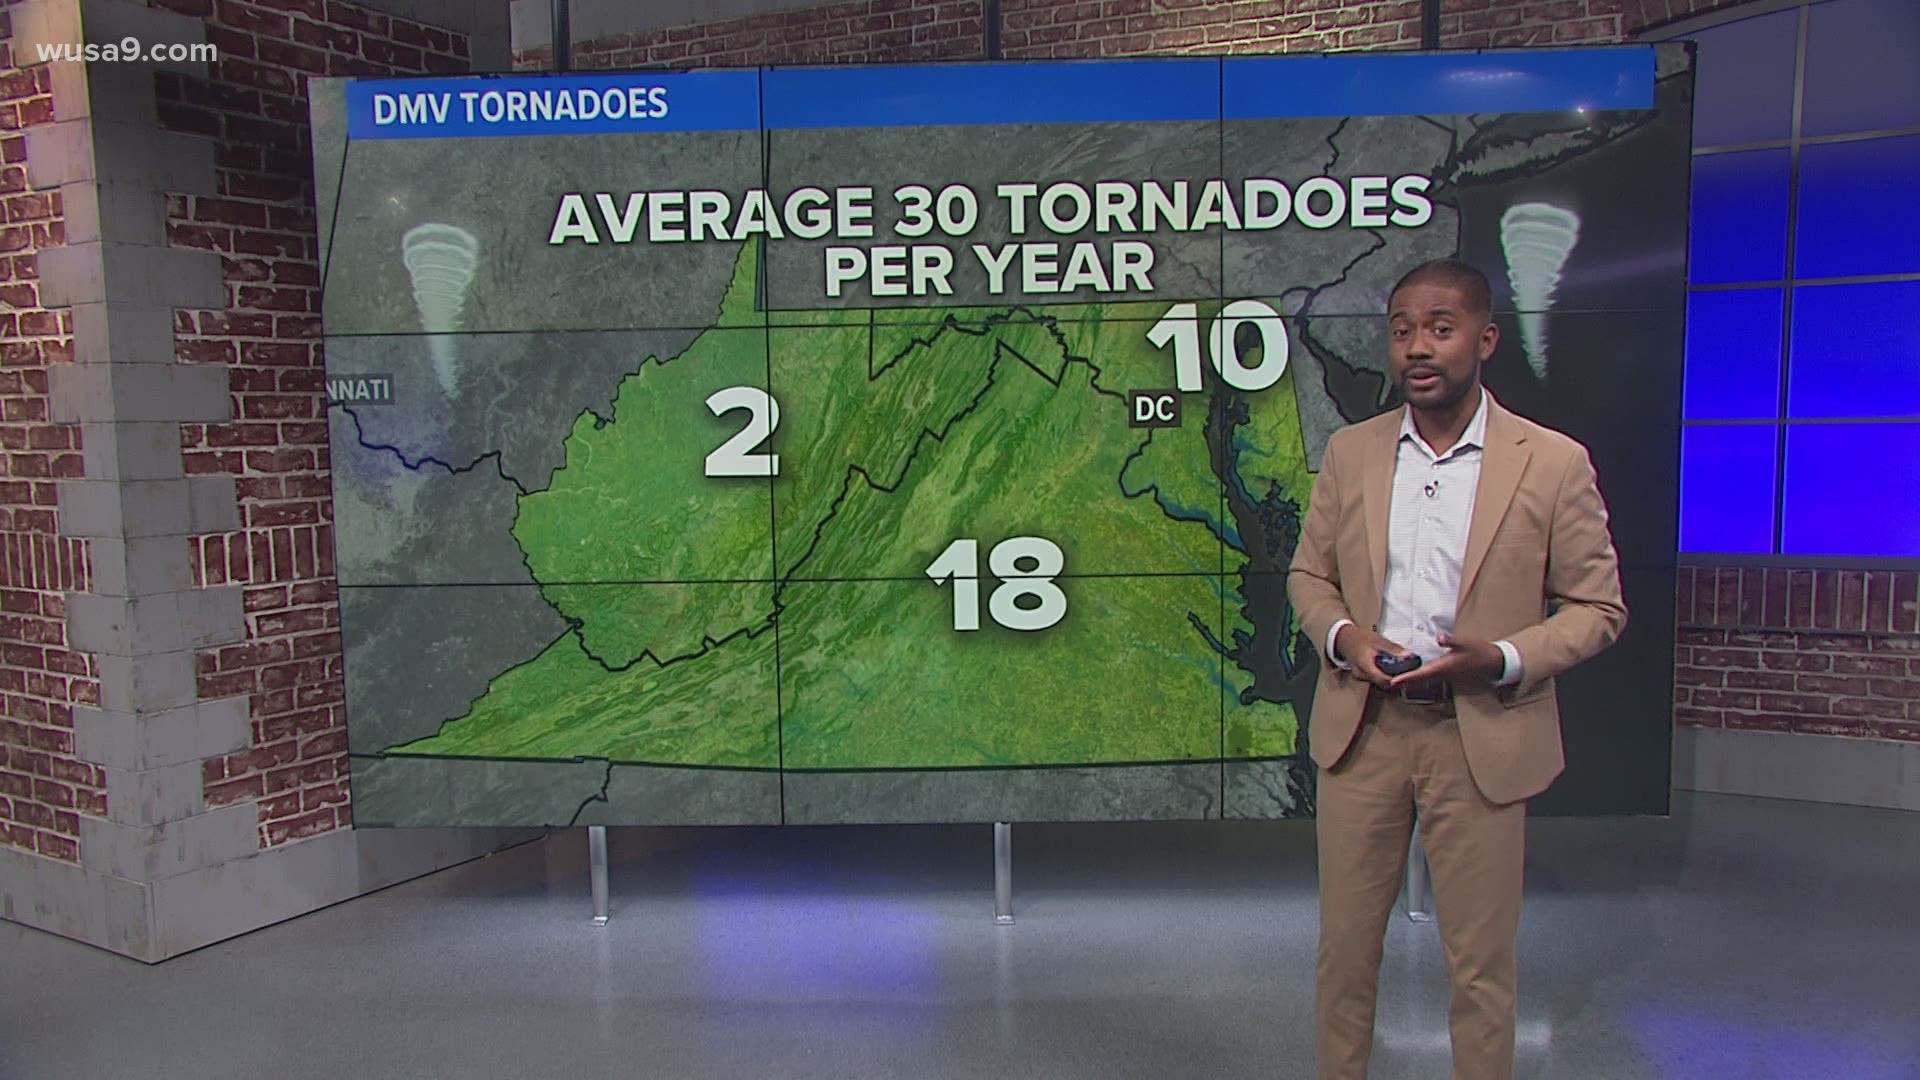 Meteorologist Chester Lampkin answers questions about tornados in the DC area, what to do if there is a warning, and what conditions make for a tornado forecast.